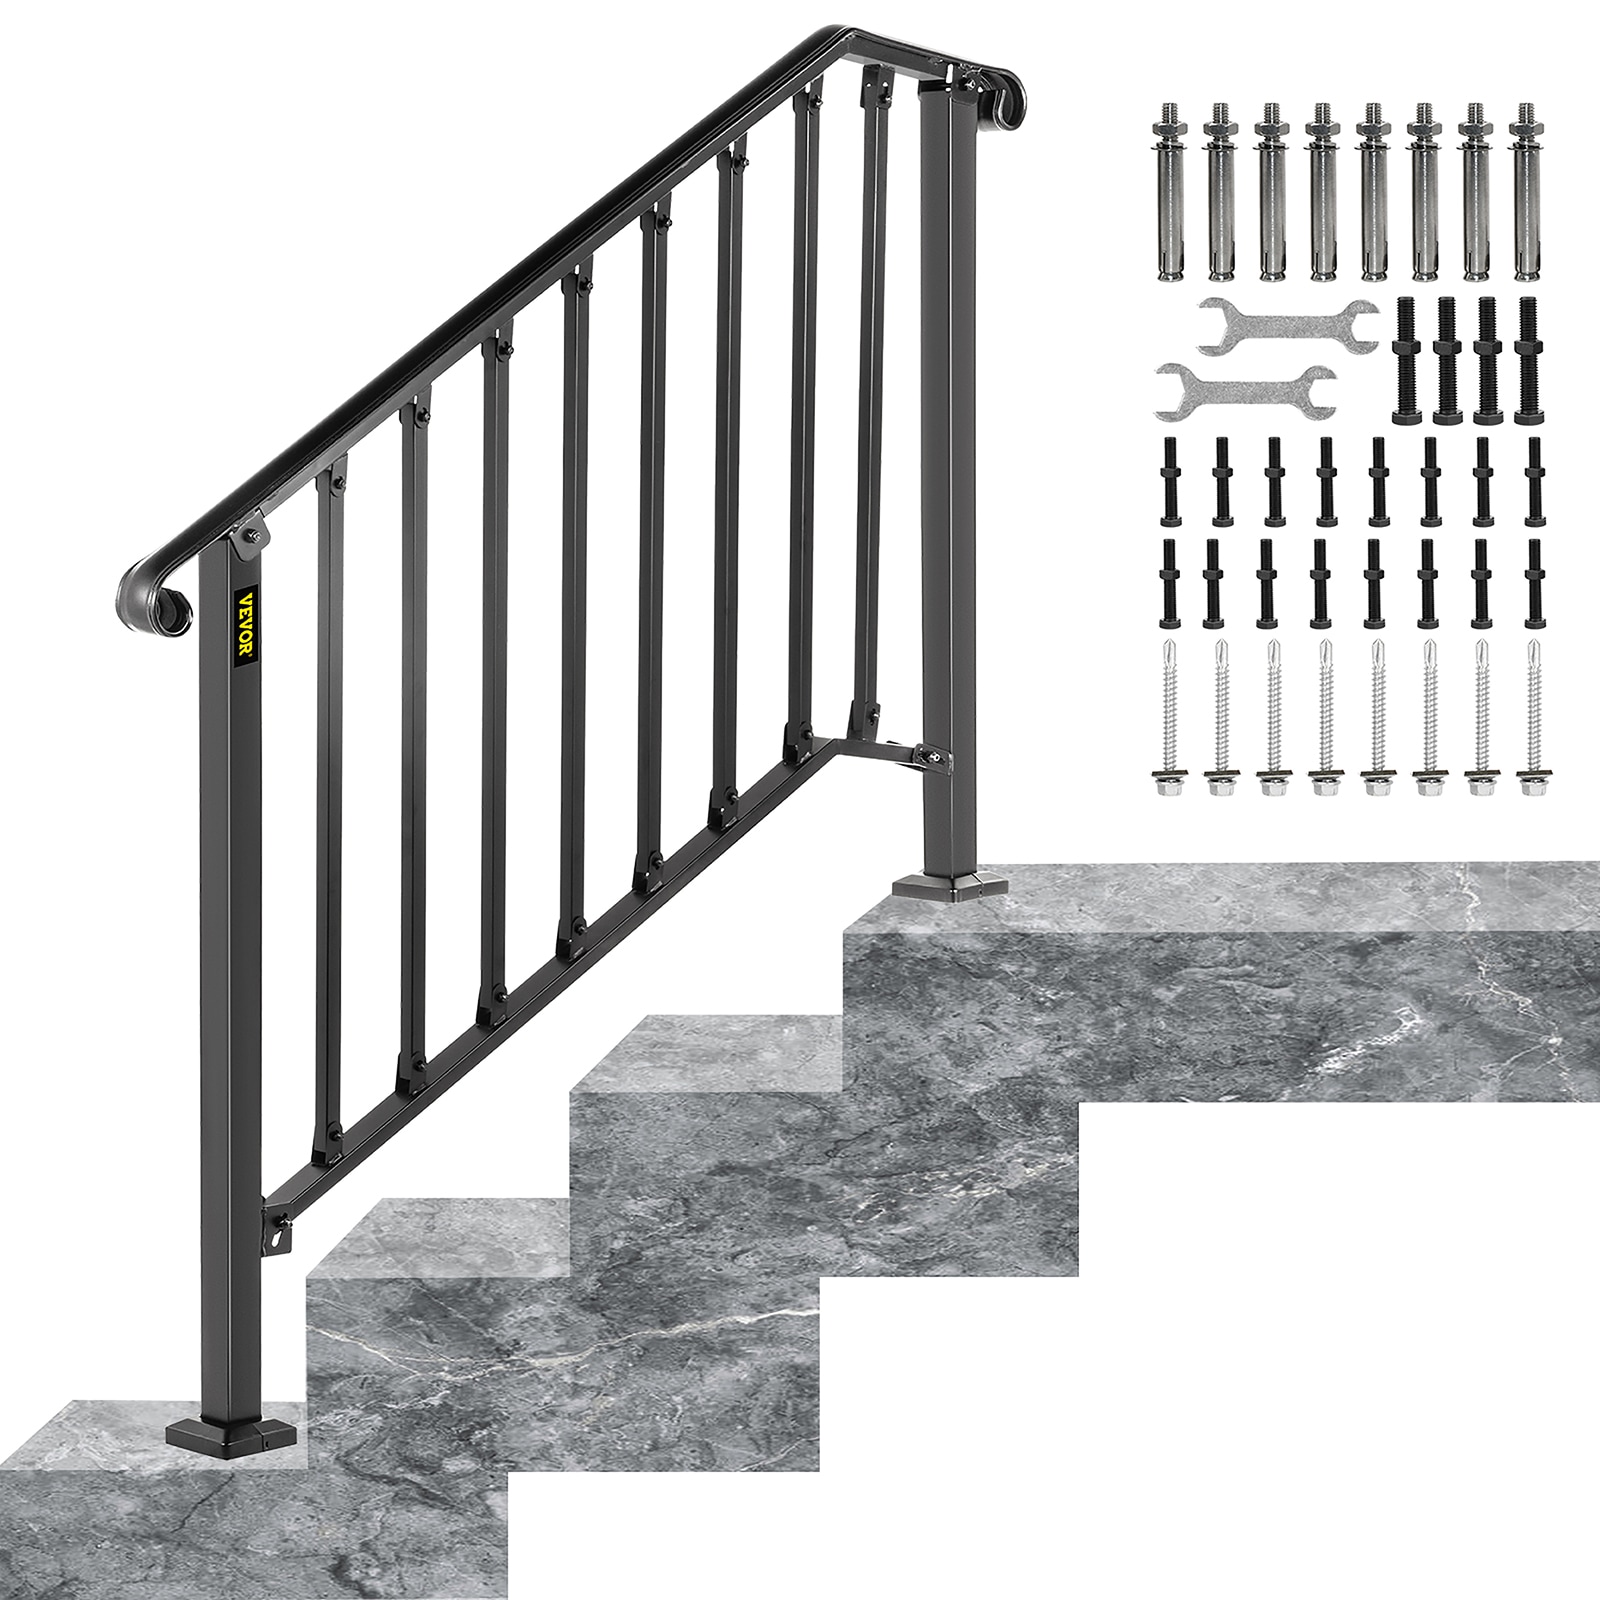 Telescoping Step Ladders at Lowes.com